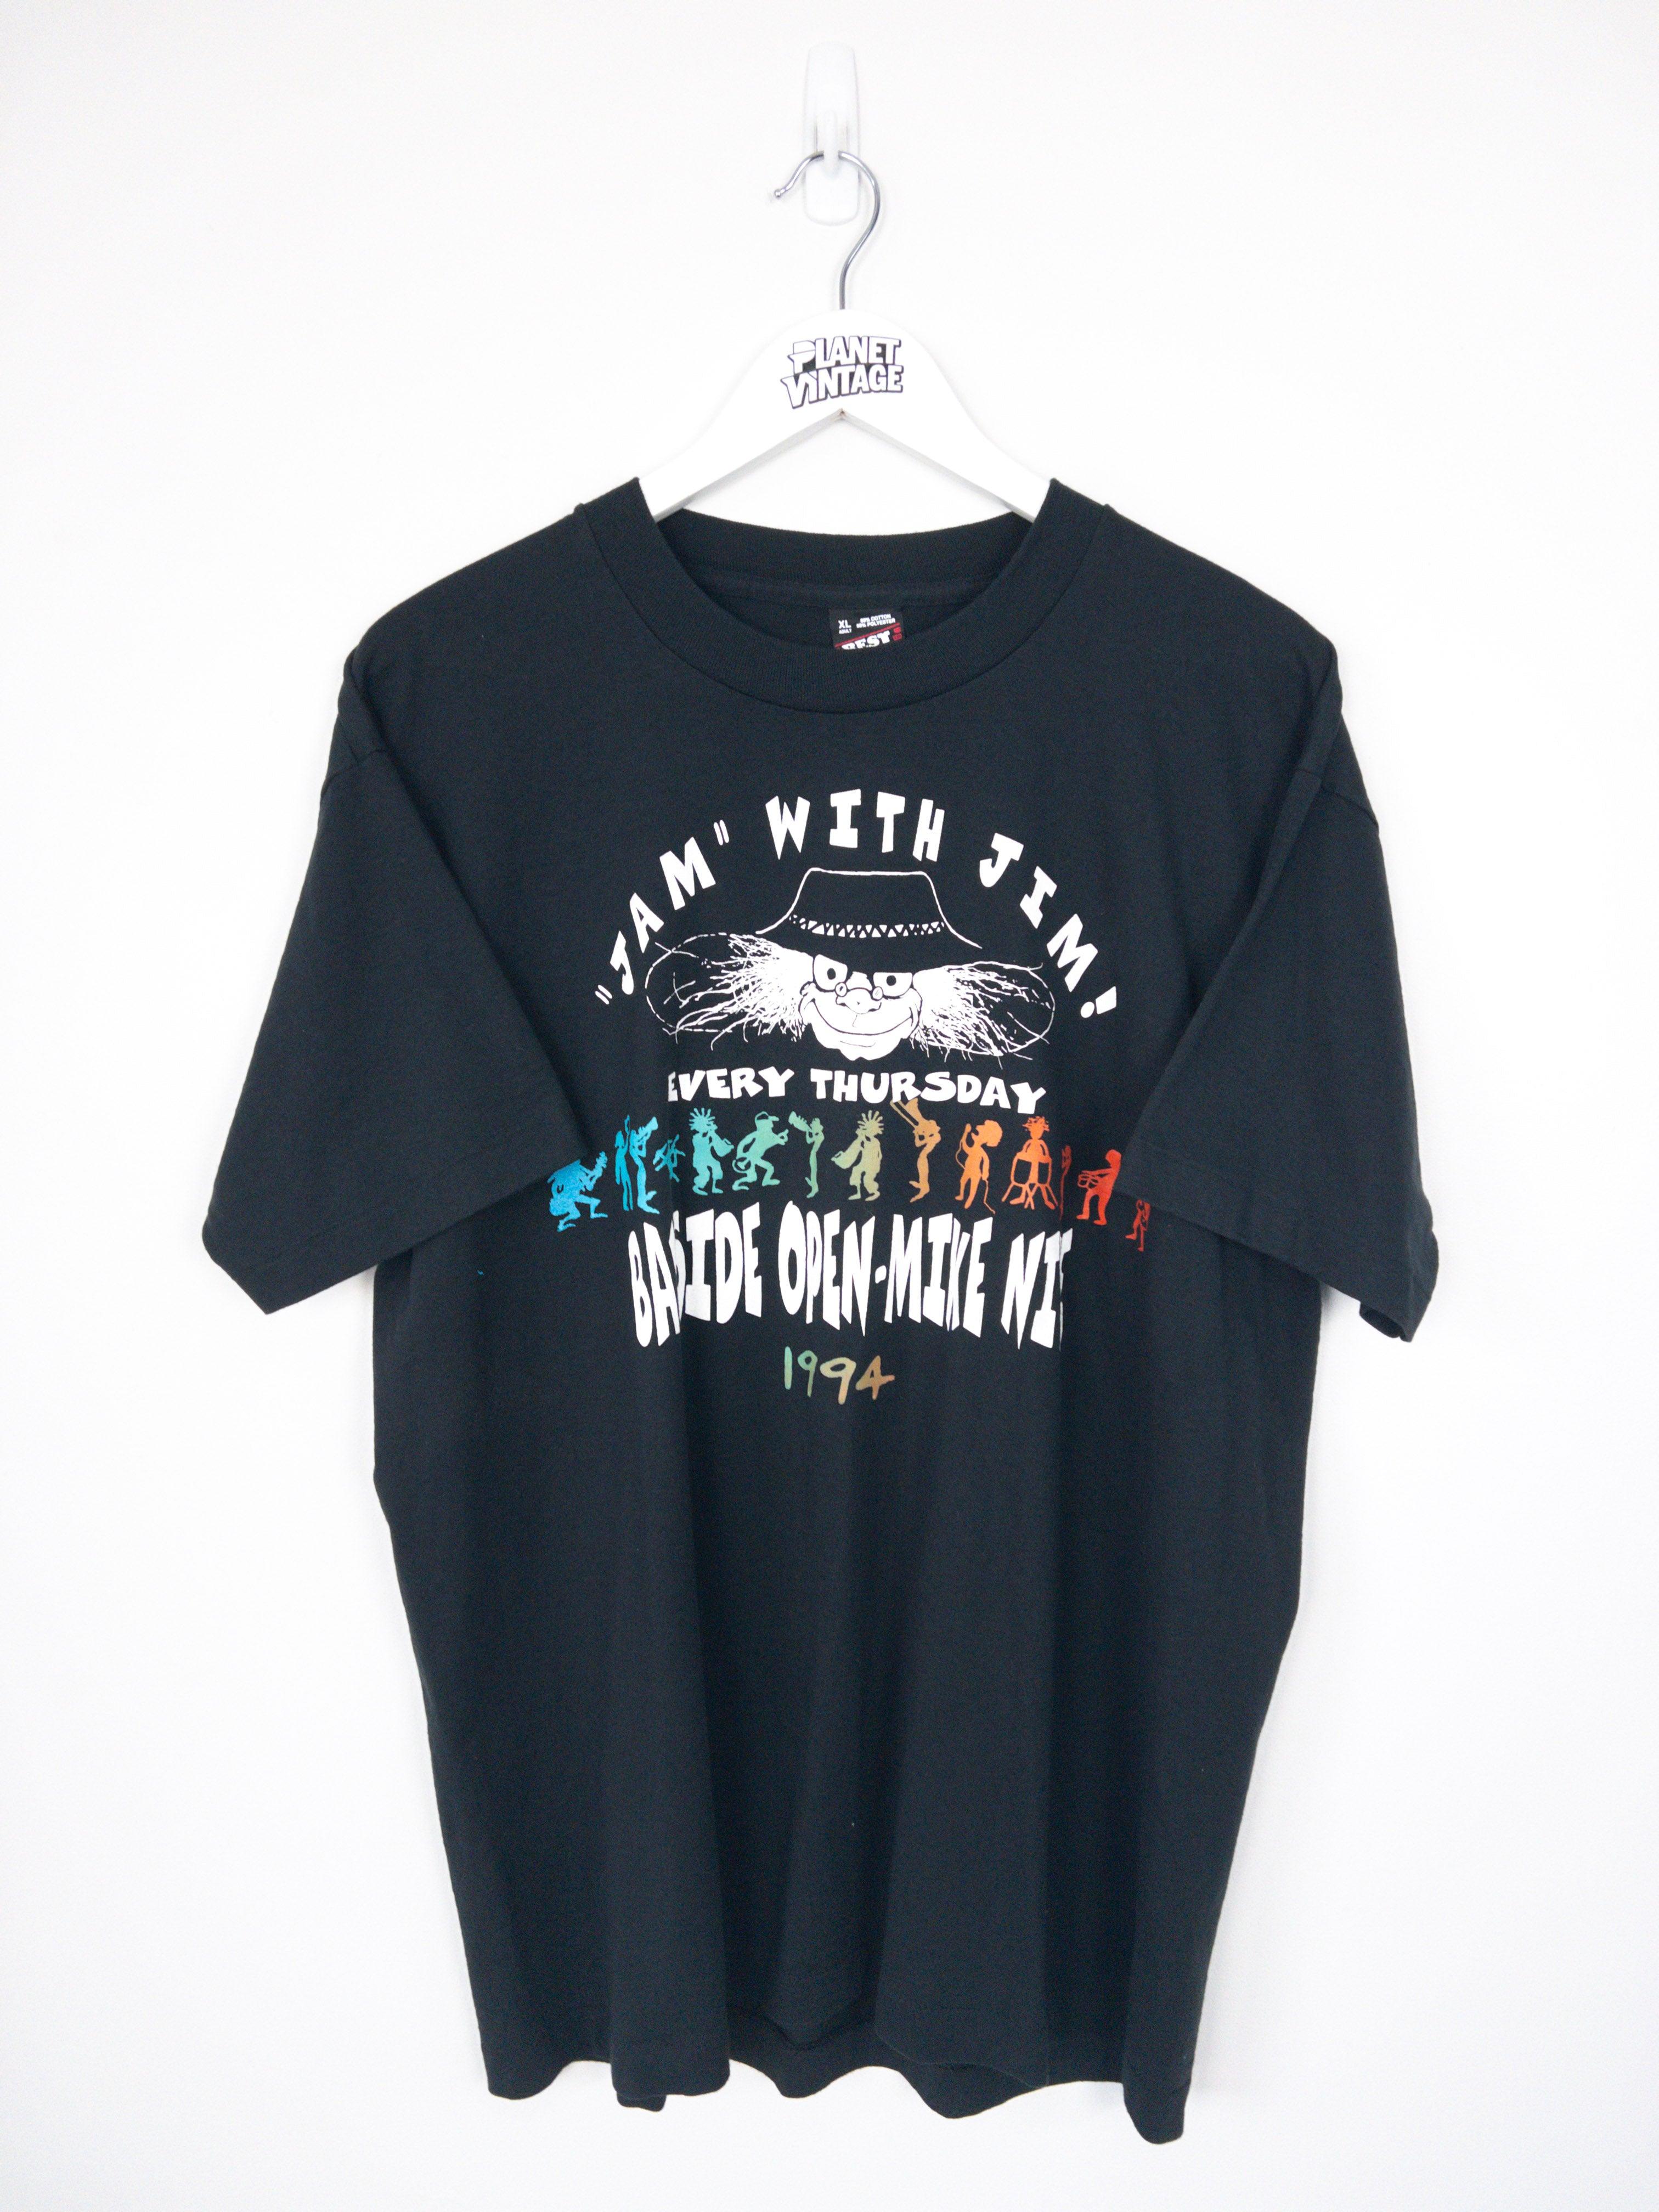 Jam with Jim Open Mic Night 1994 Tee (XL) - Planet Vintage Store